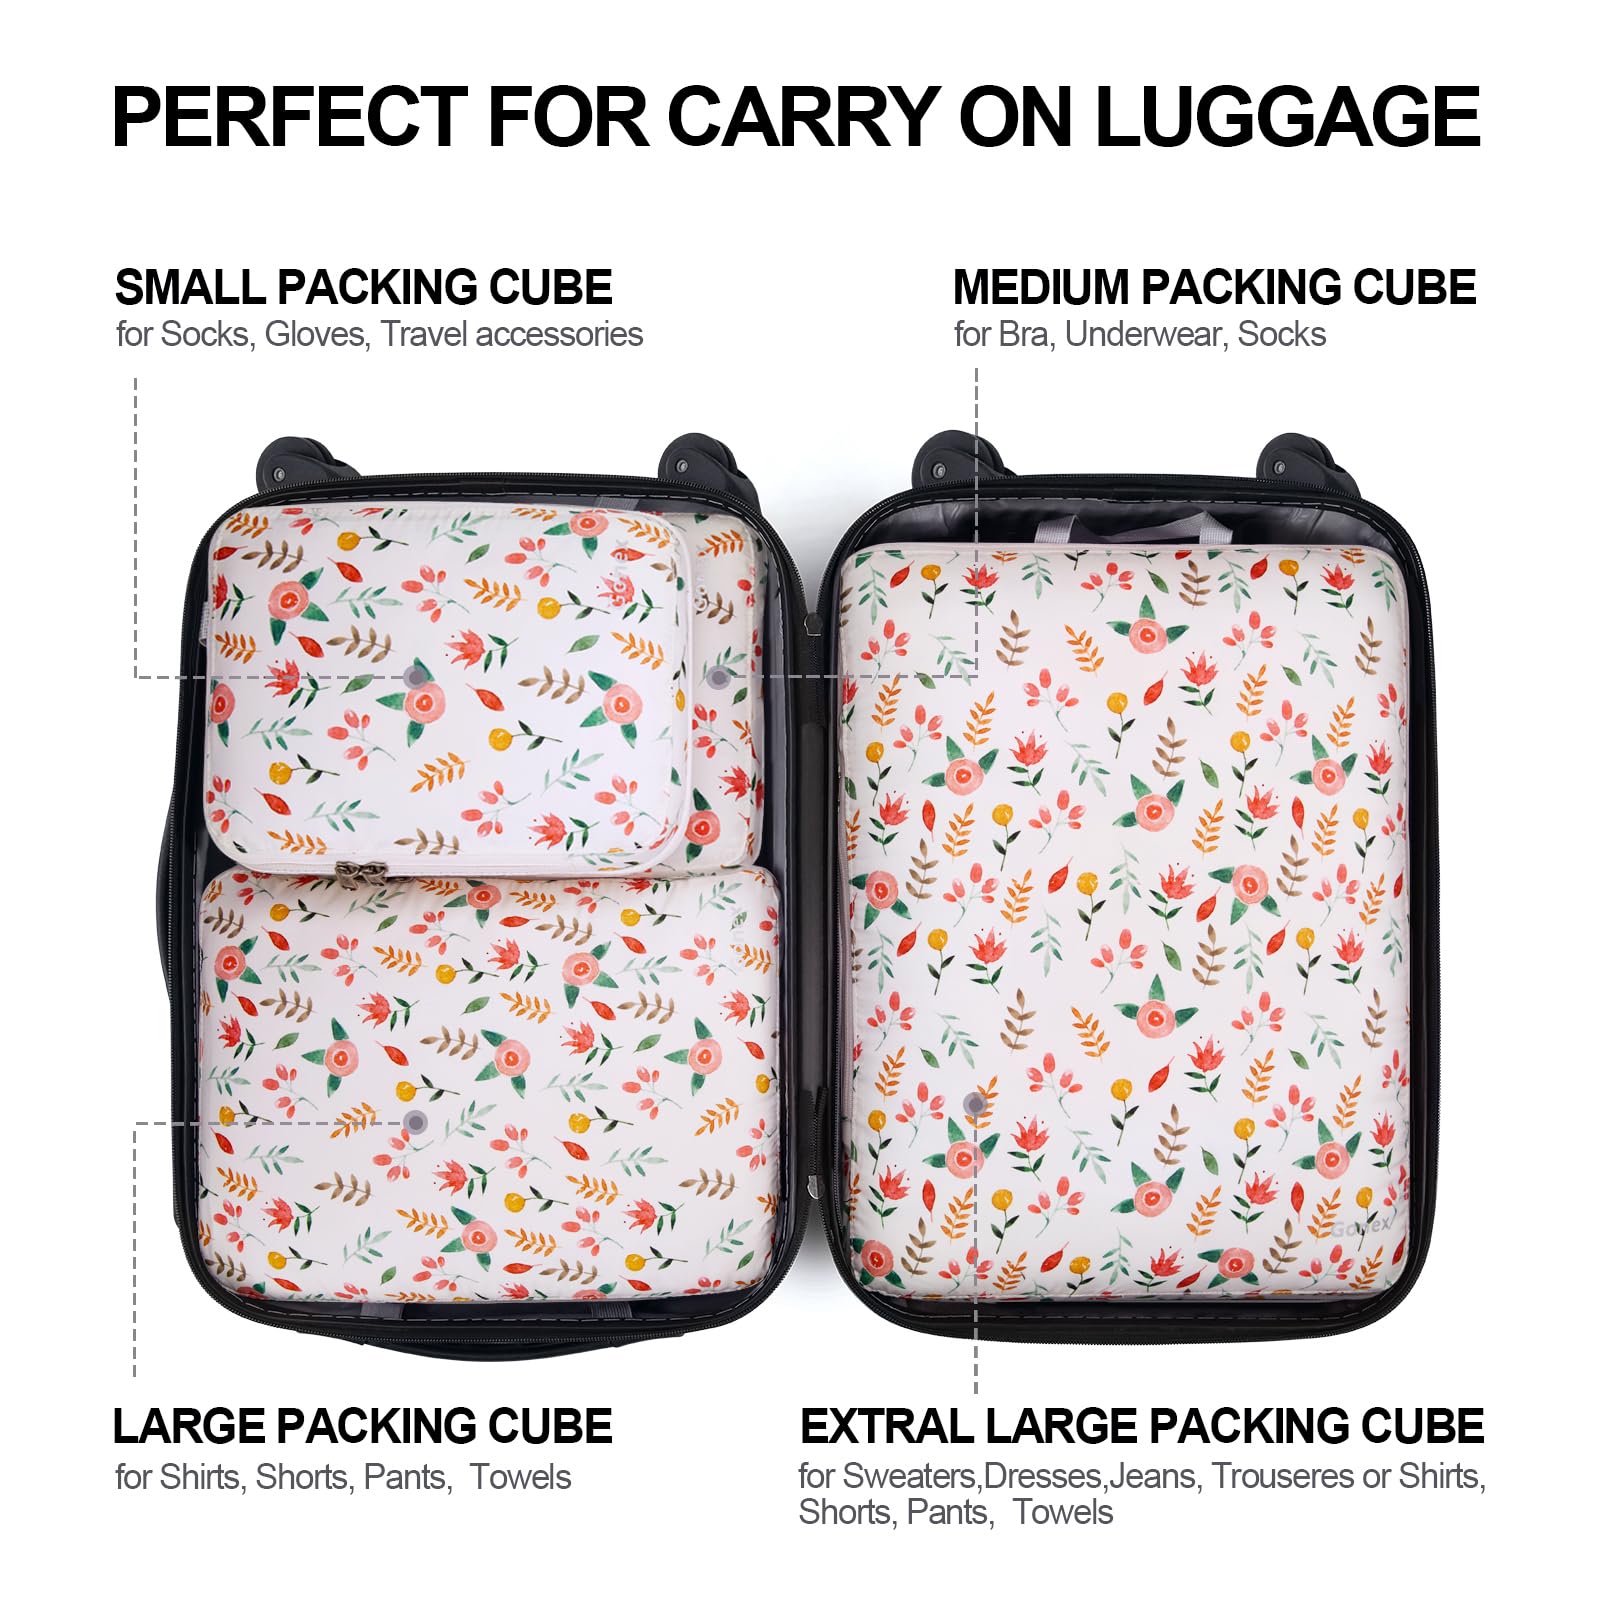 Extra Large Compression Packing Cubes for Travel-Extra Packaging Cube  Luggage Organizers 7 Piece Set-Ultralight, Expandable/Compression Bags  Clothes